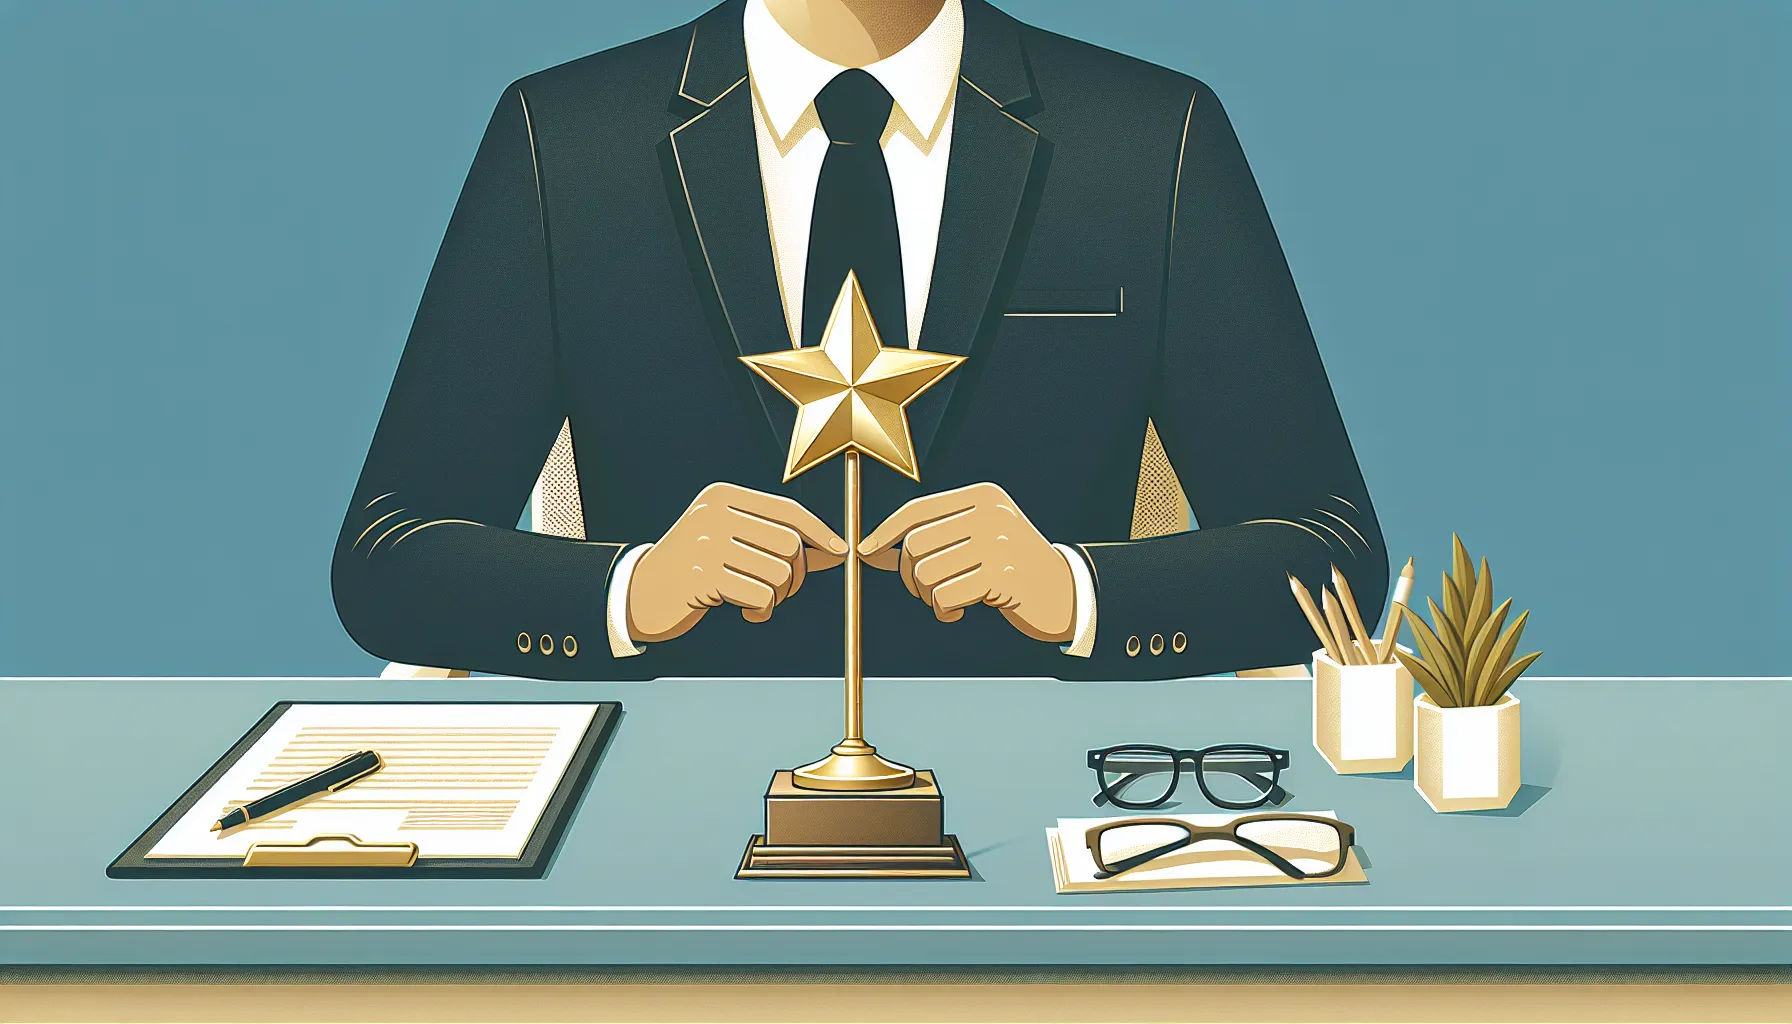 9 Ways to Express Employee Recognition